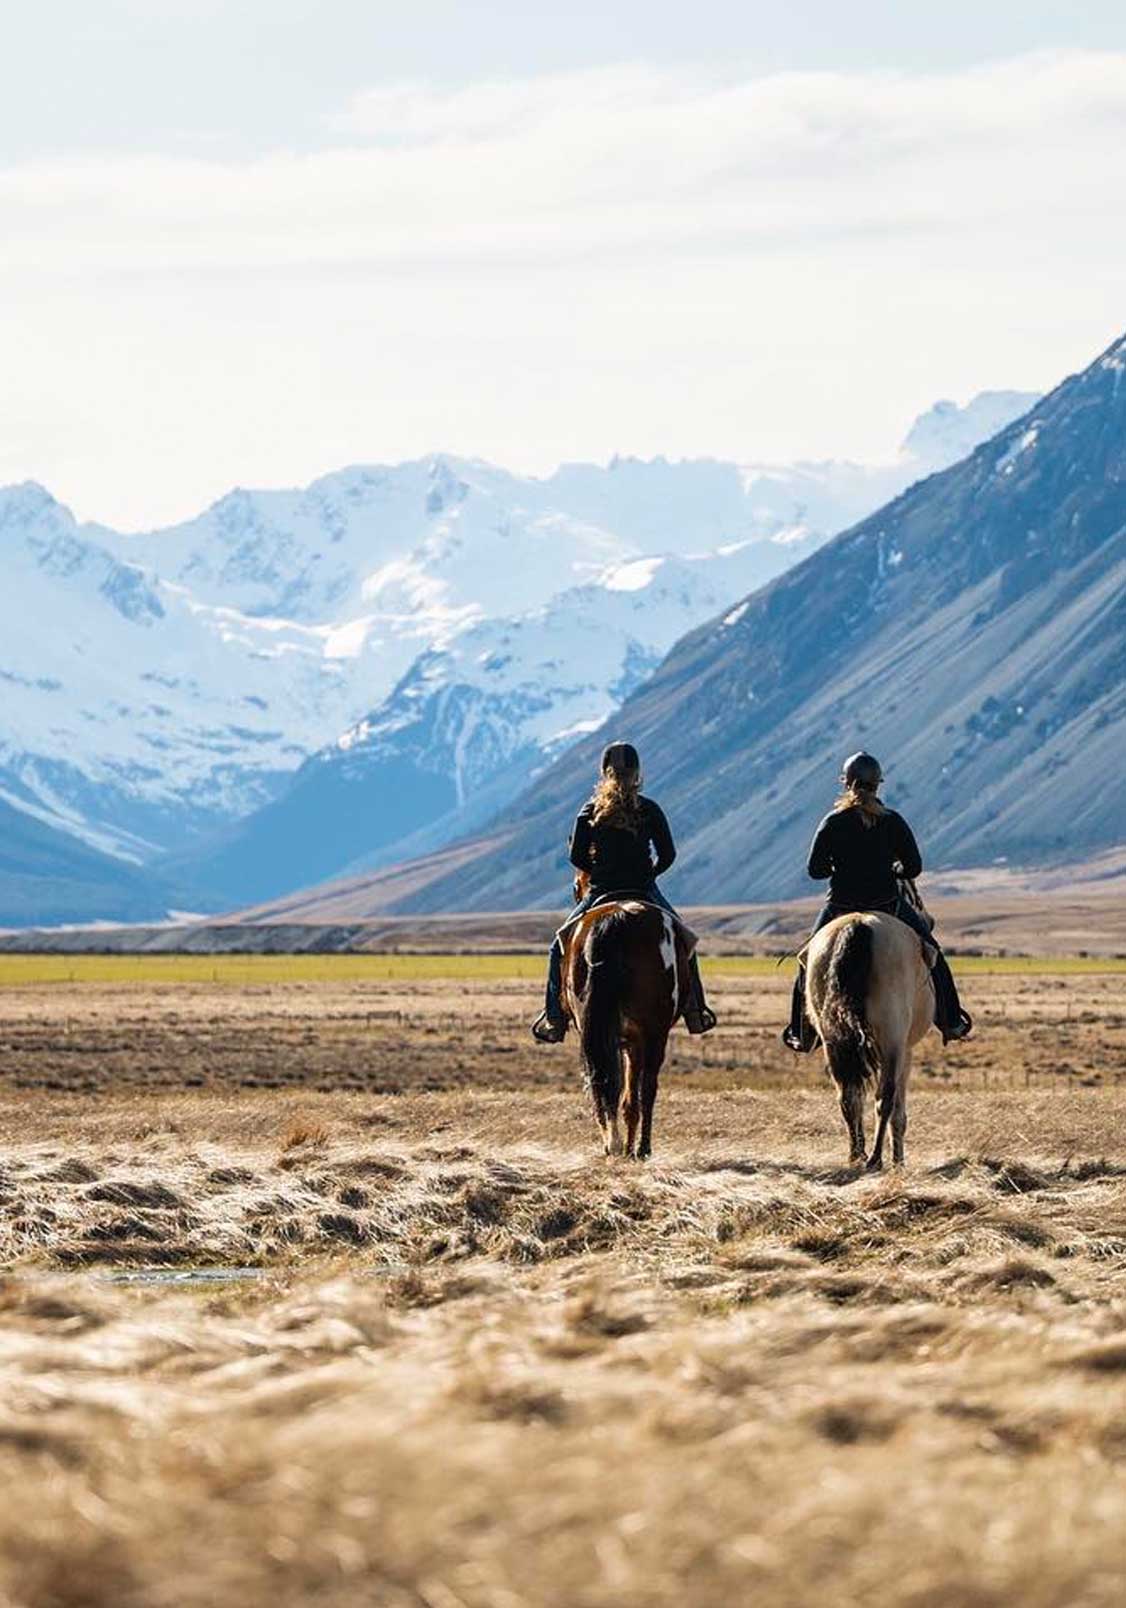 Two people horseback riding in a scenic valley in New Zealand.